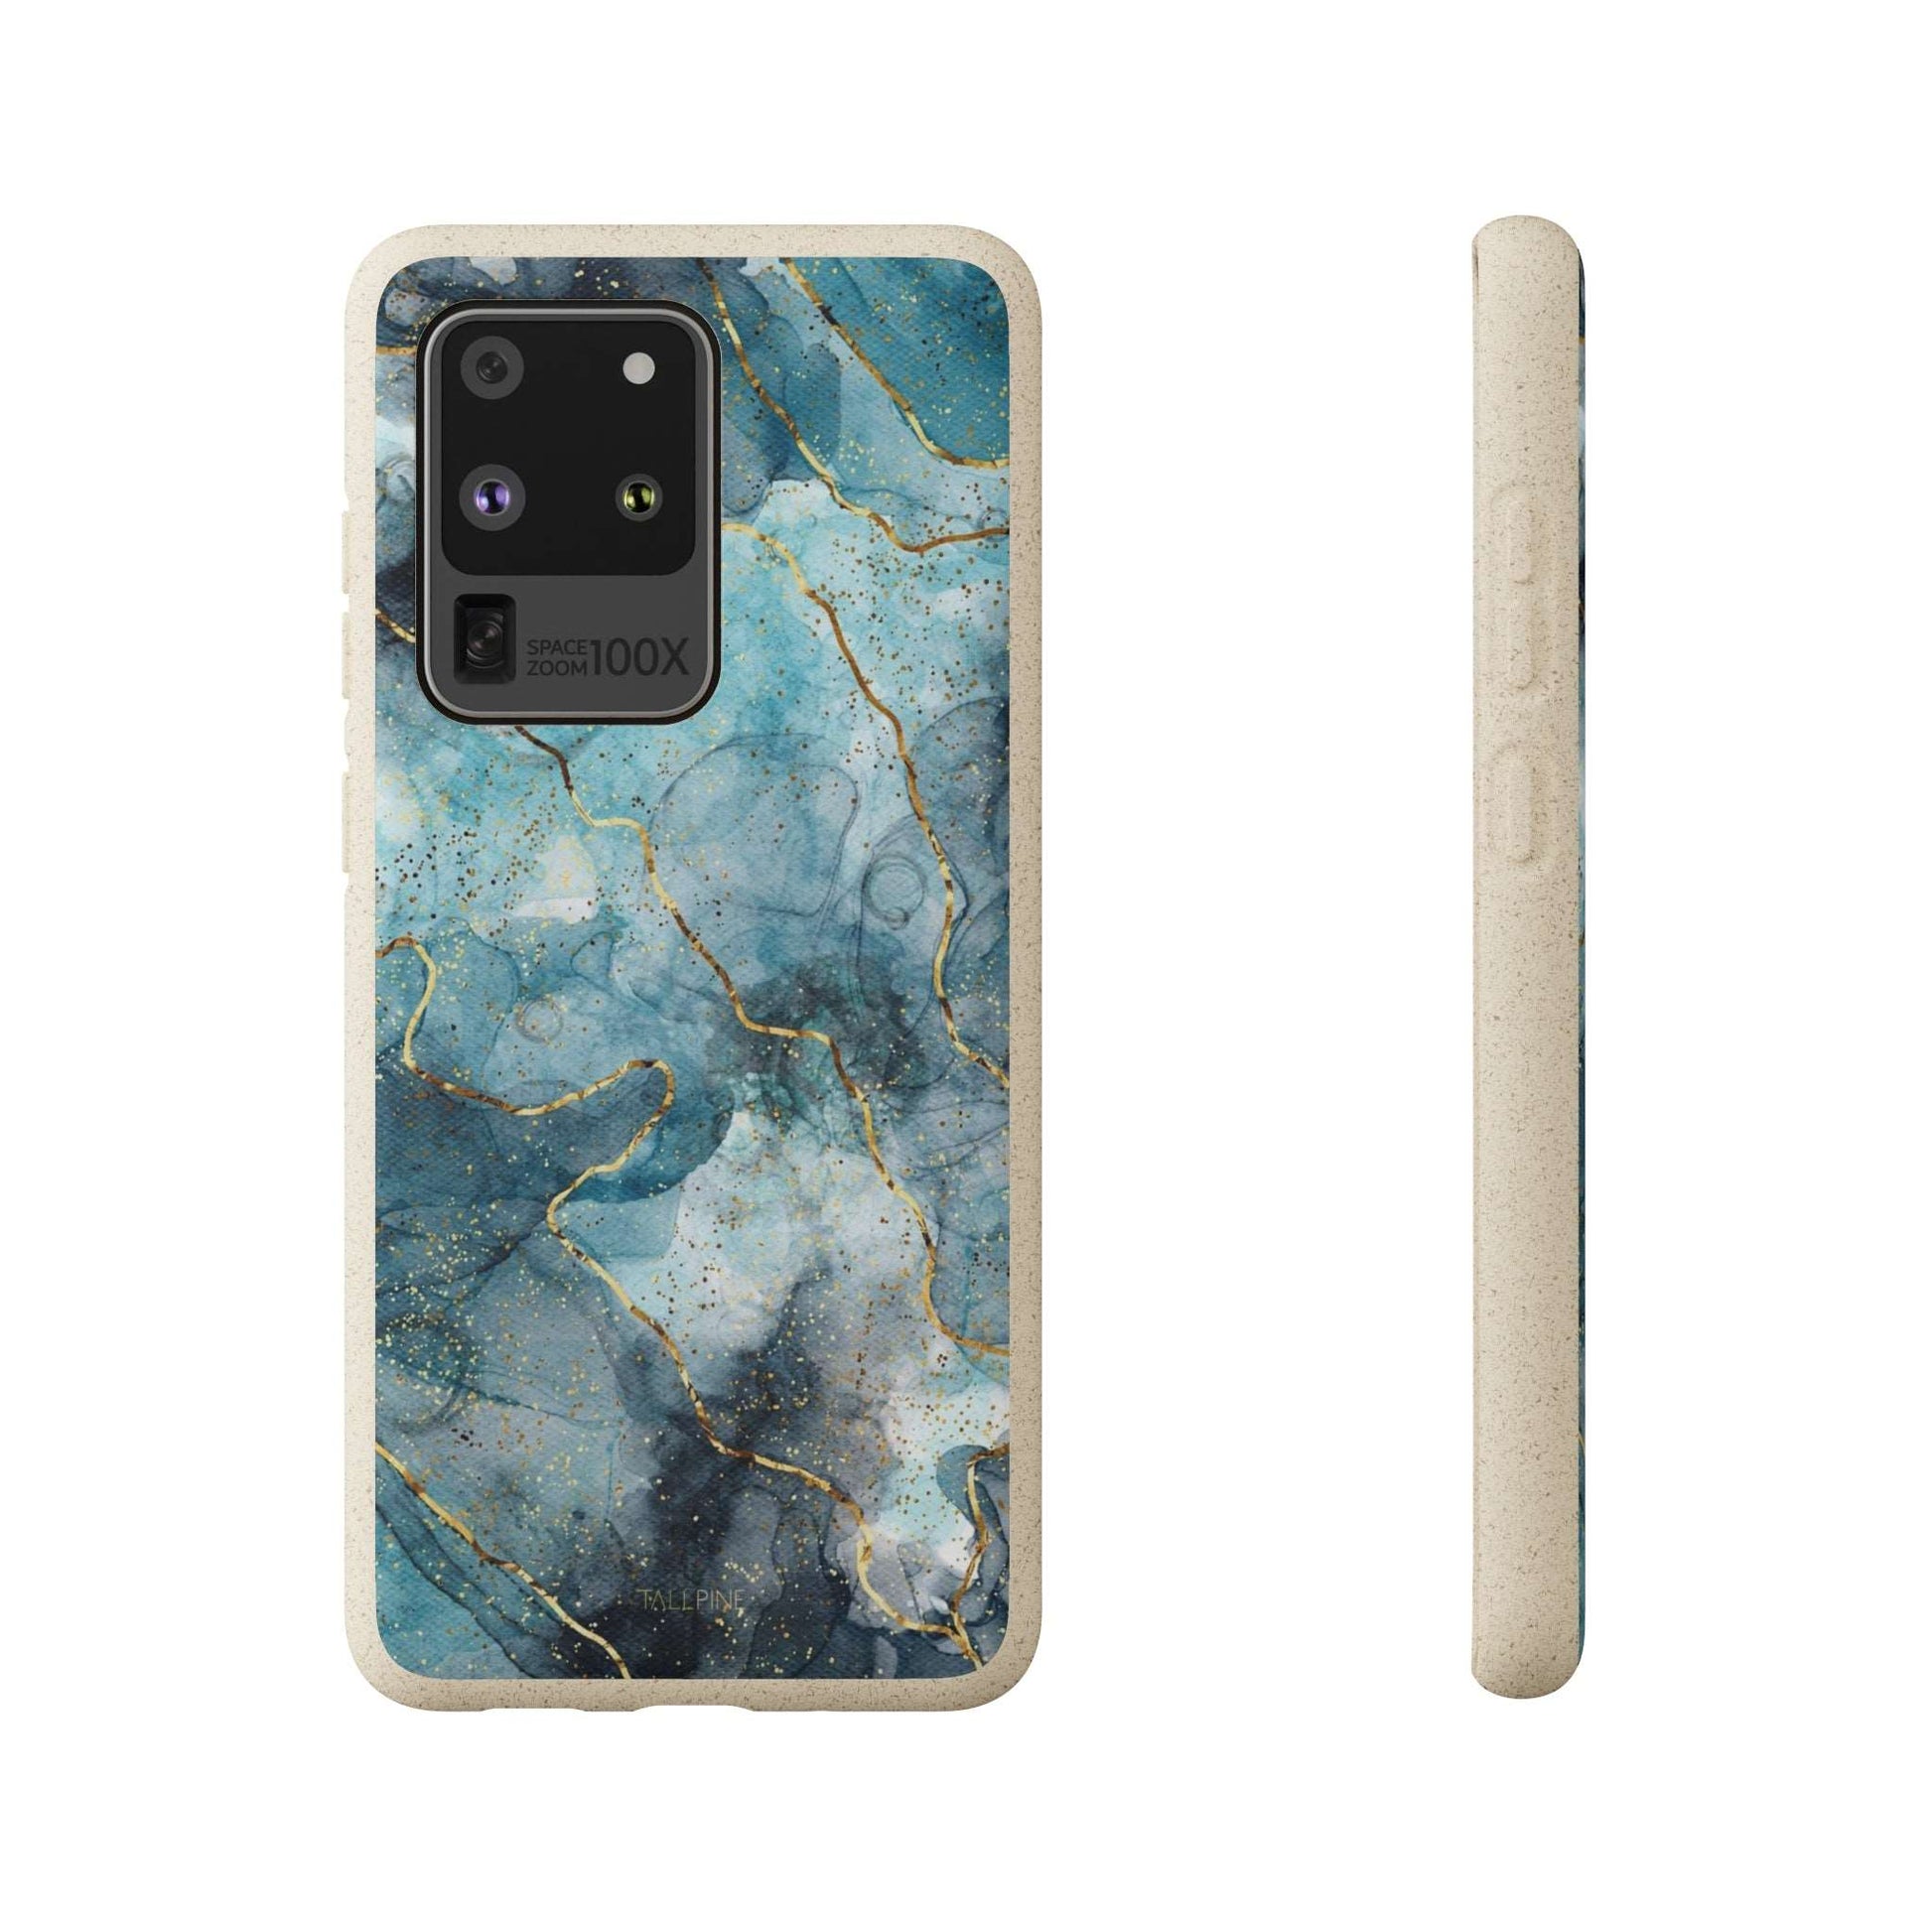 Sapphire Marble - Eco Case Samsung Galaxy S20 Ultra - Tallpine Cases | Sustainable and Eco-Friendly - Abstract Blue Marble